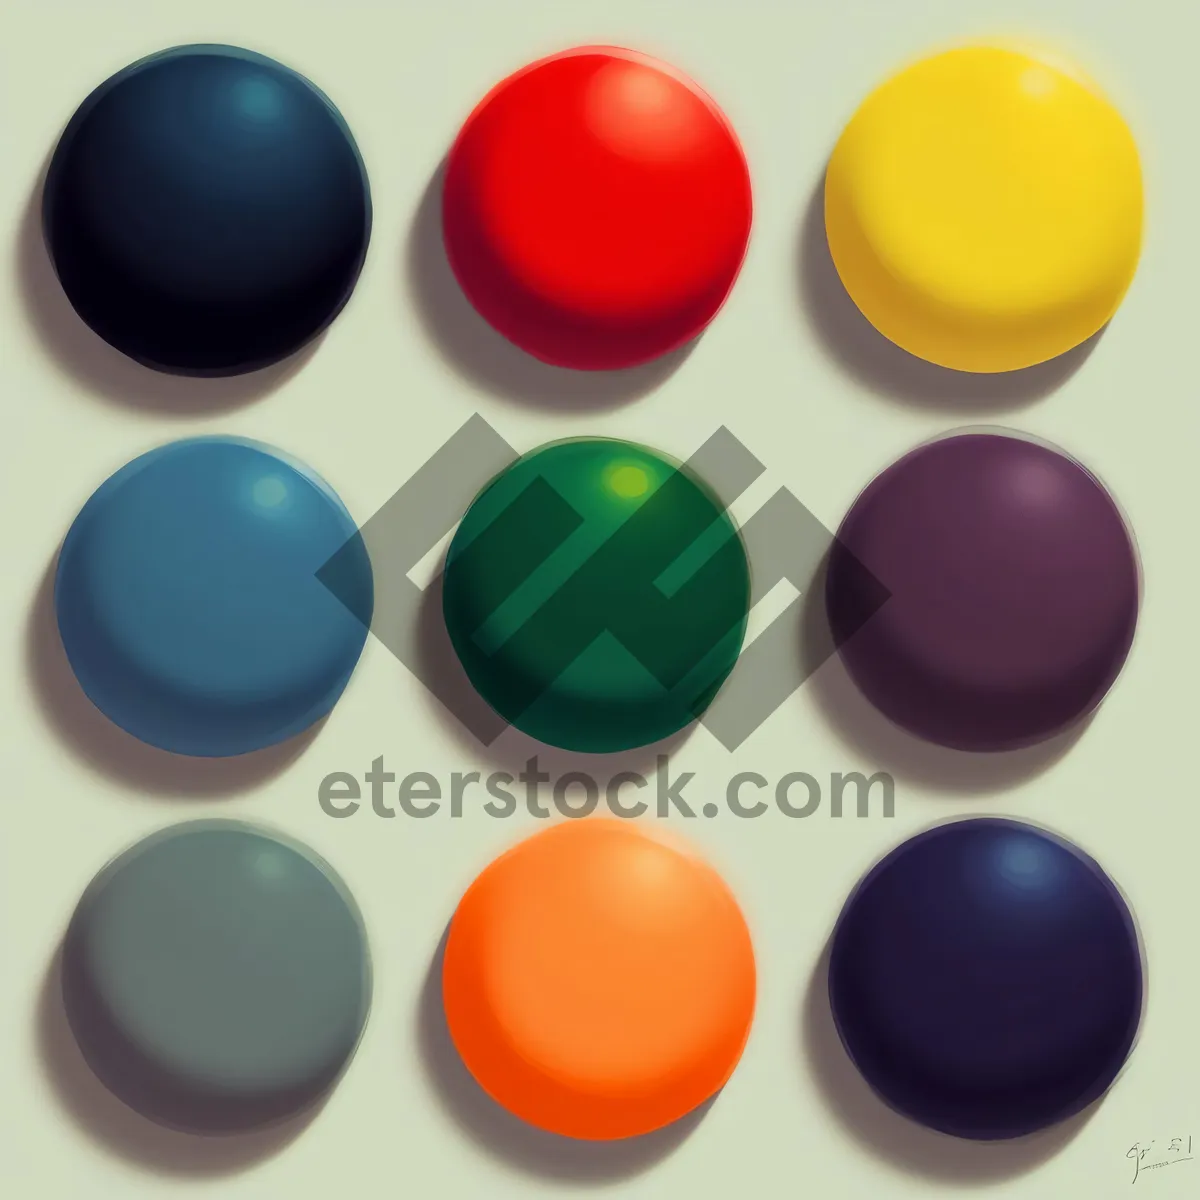 Picture of Colorful Shiny Glass Web Buttons Collection